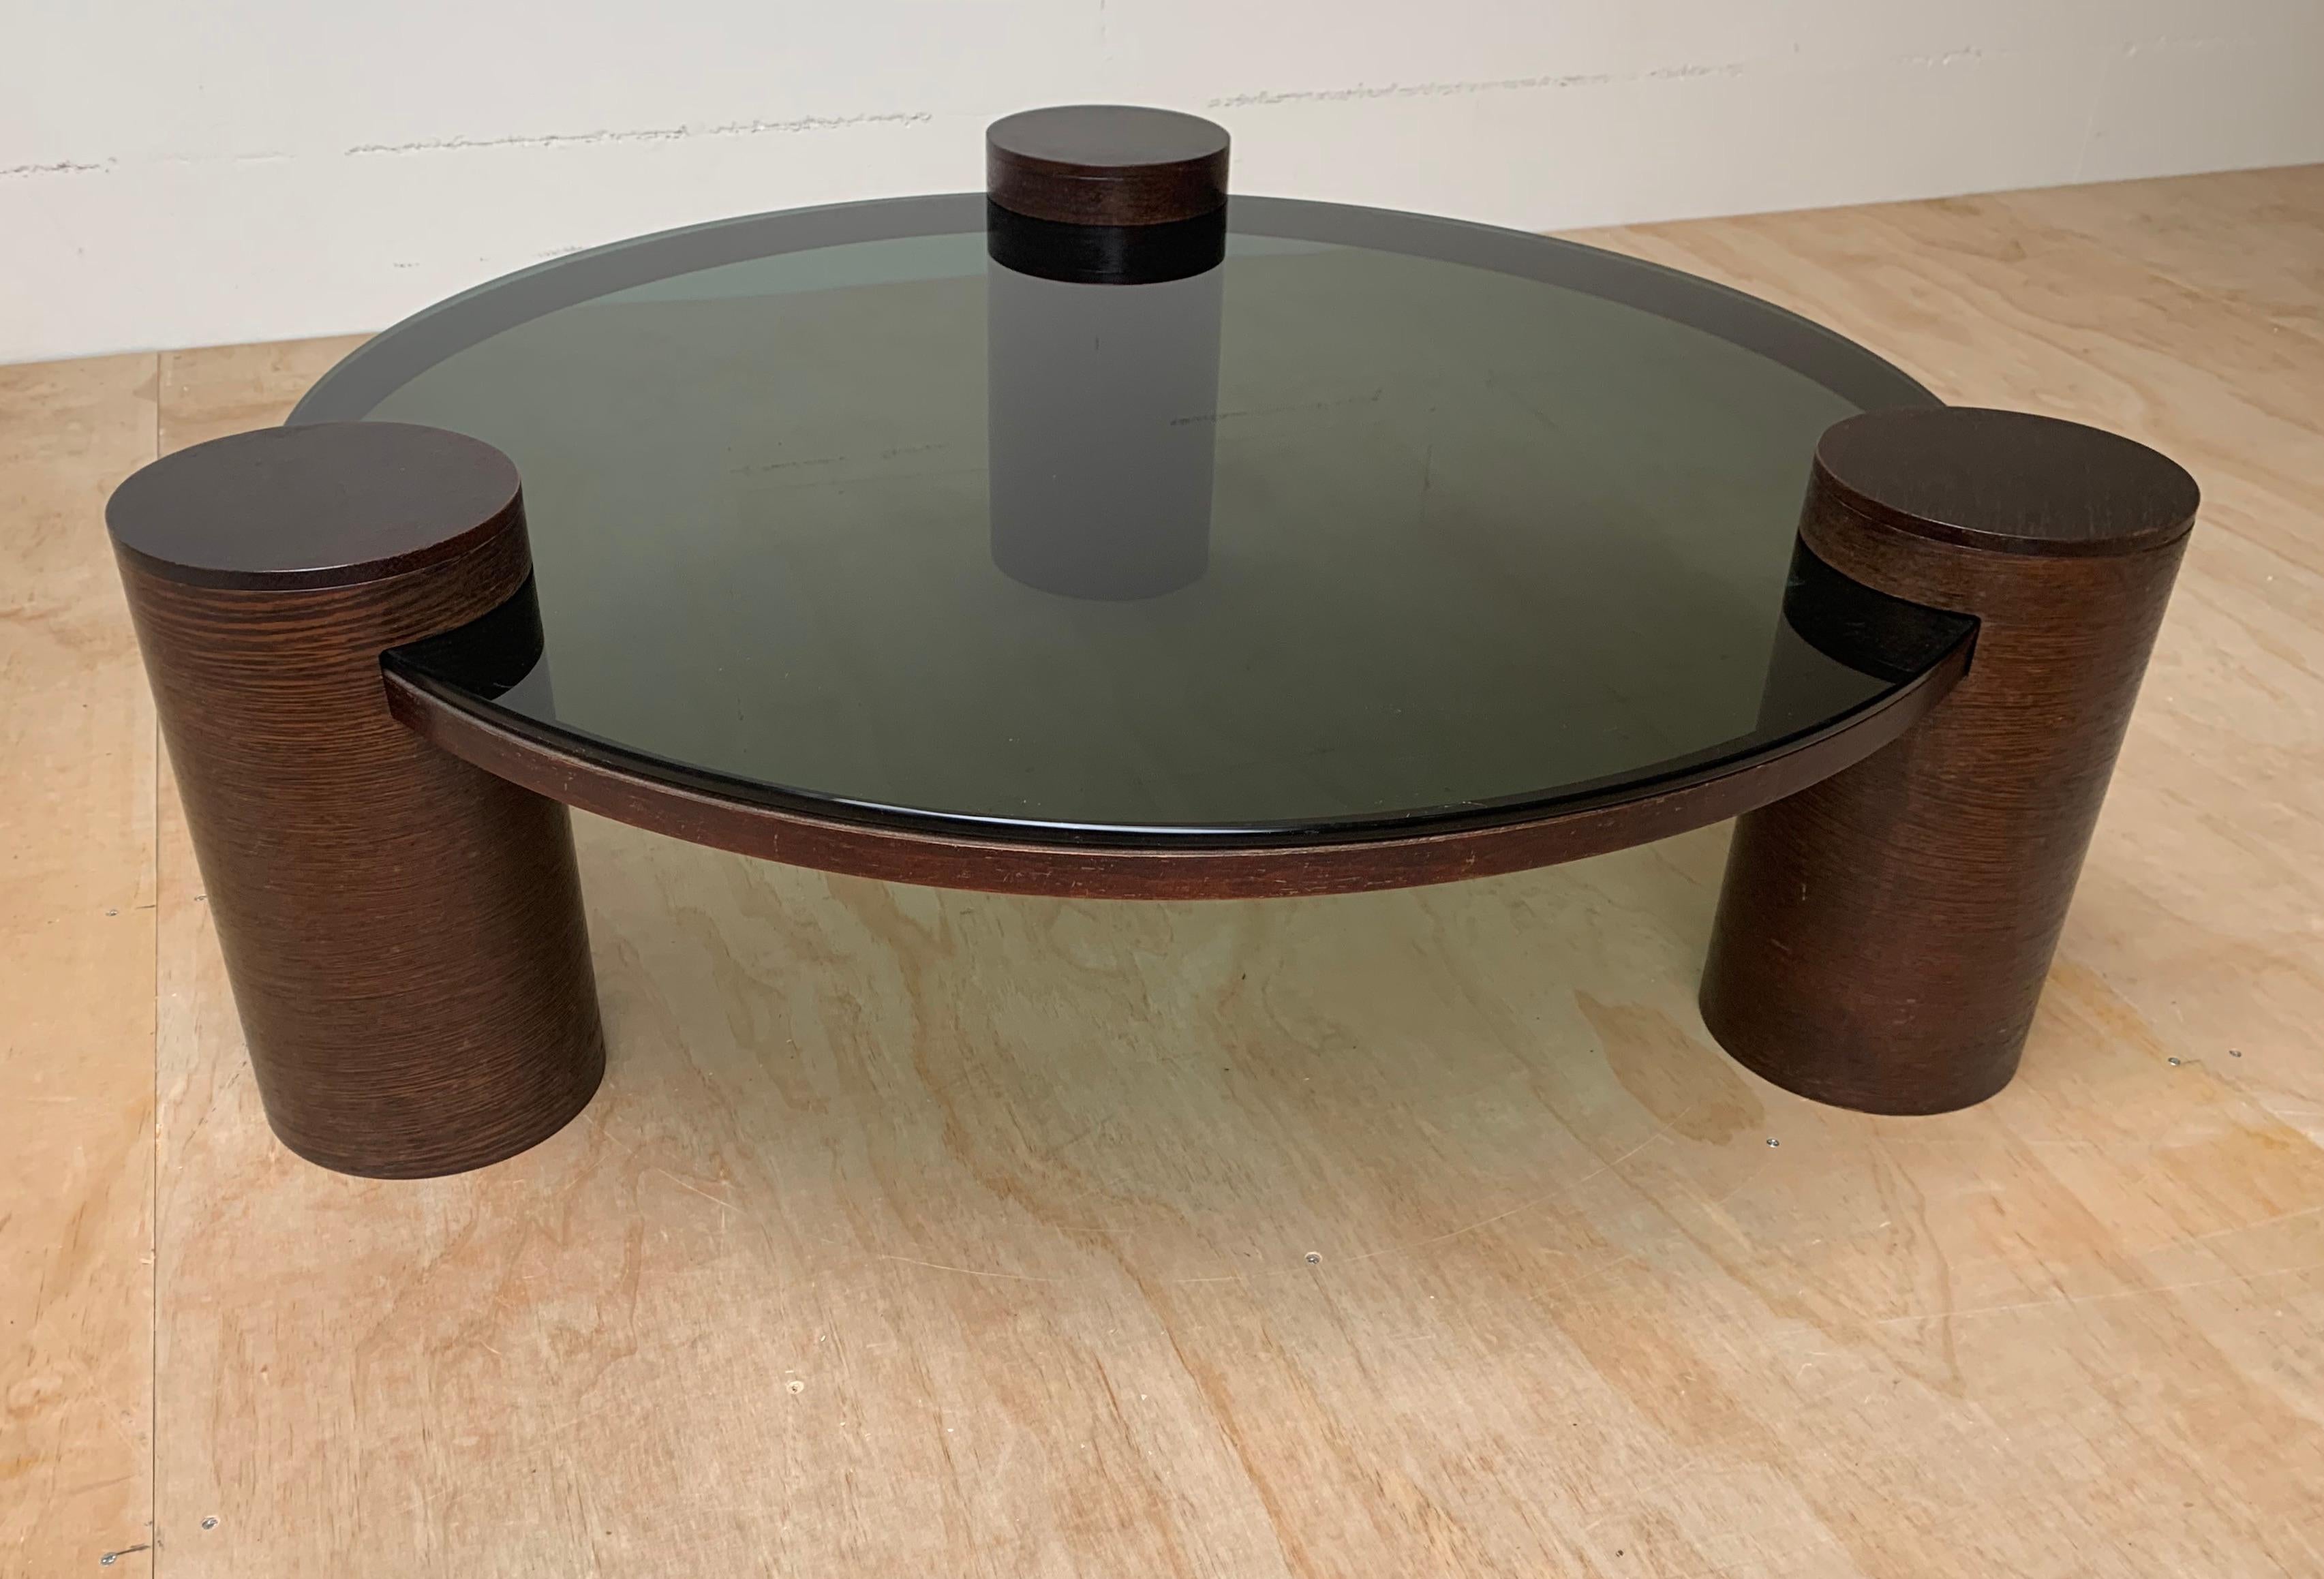 Hand-Crafted Unique Midcentury Modern Smoked Green Glass Coffee Table w Three Wooden Columns For Sale